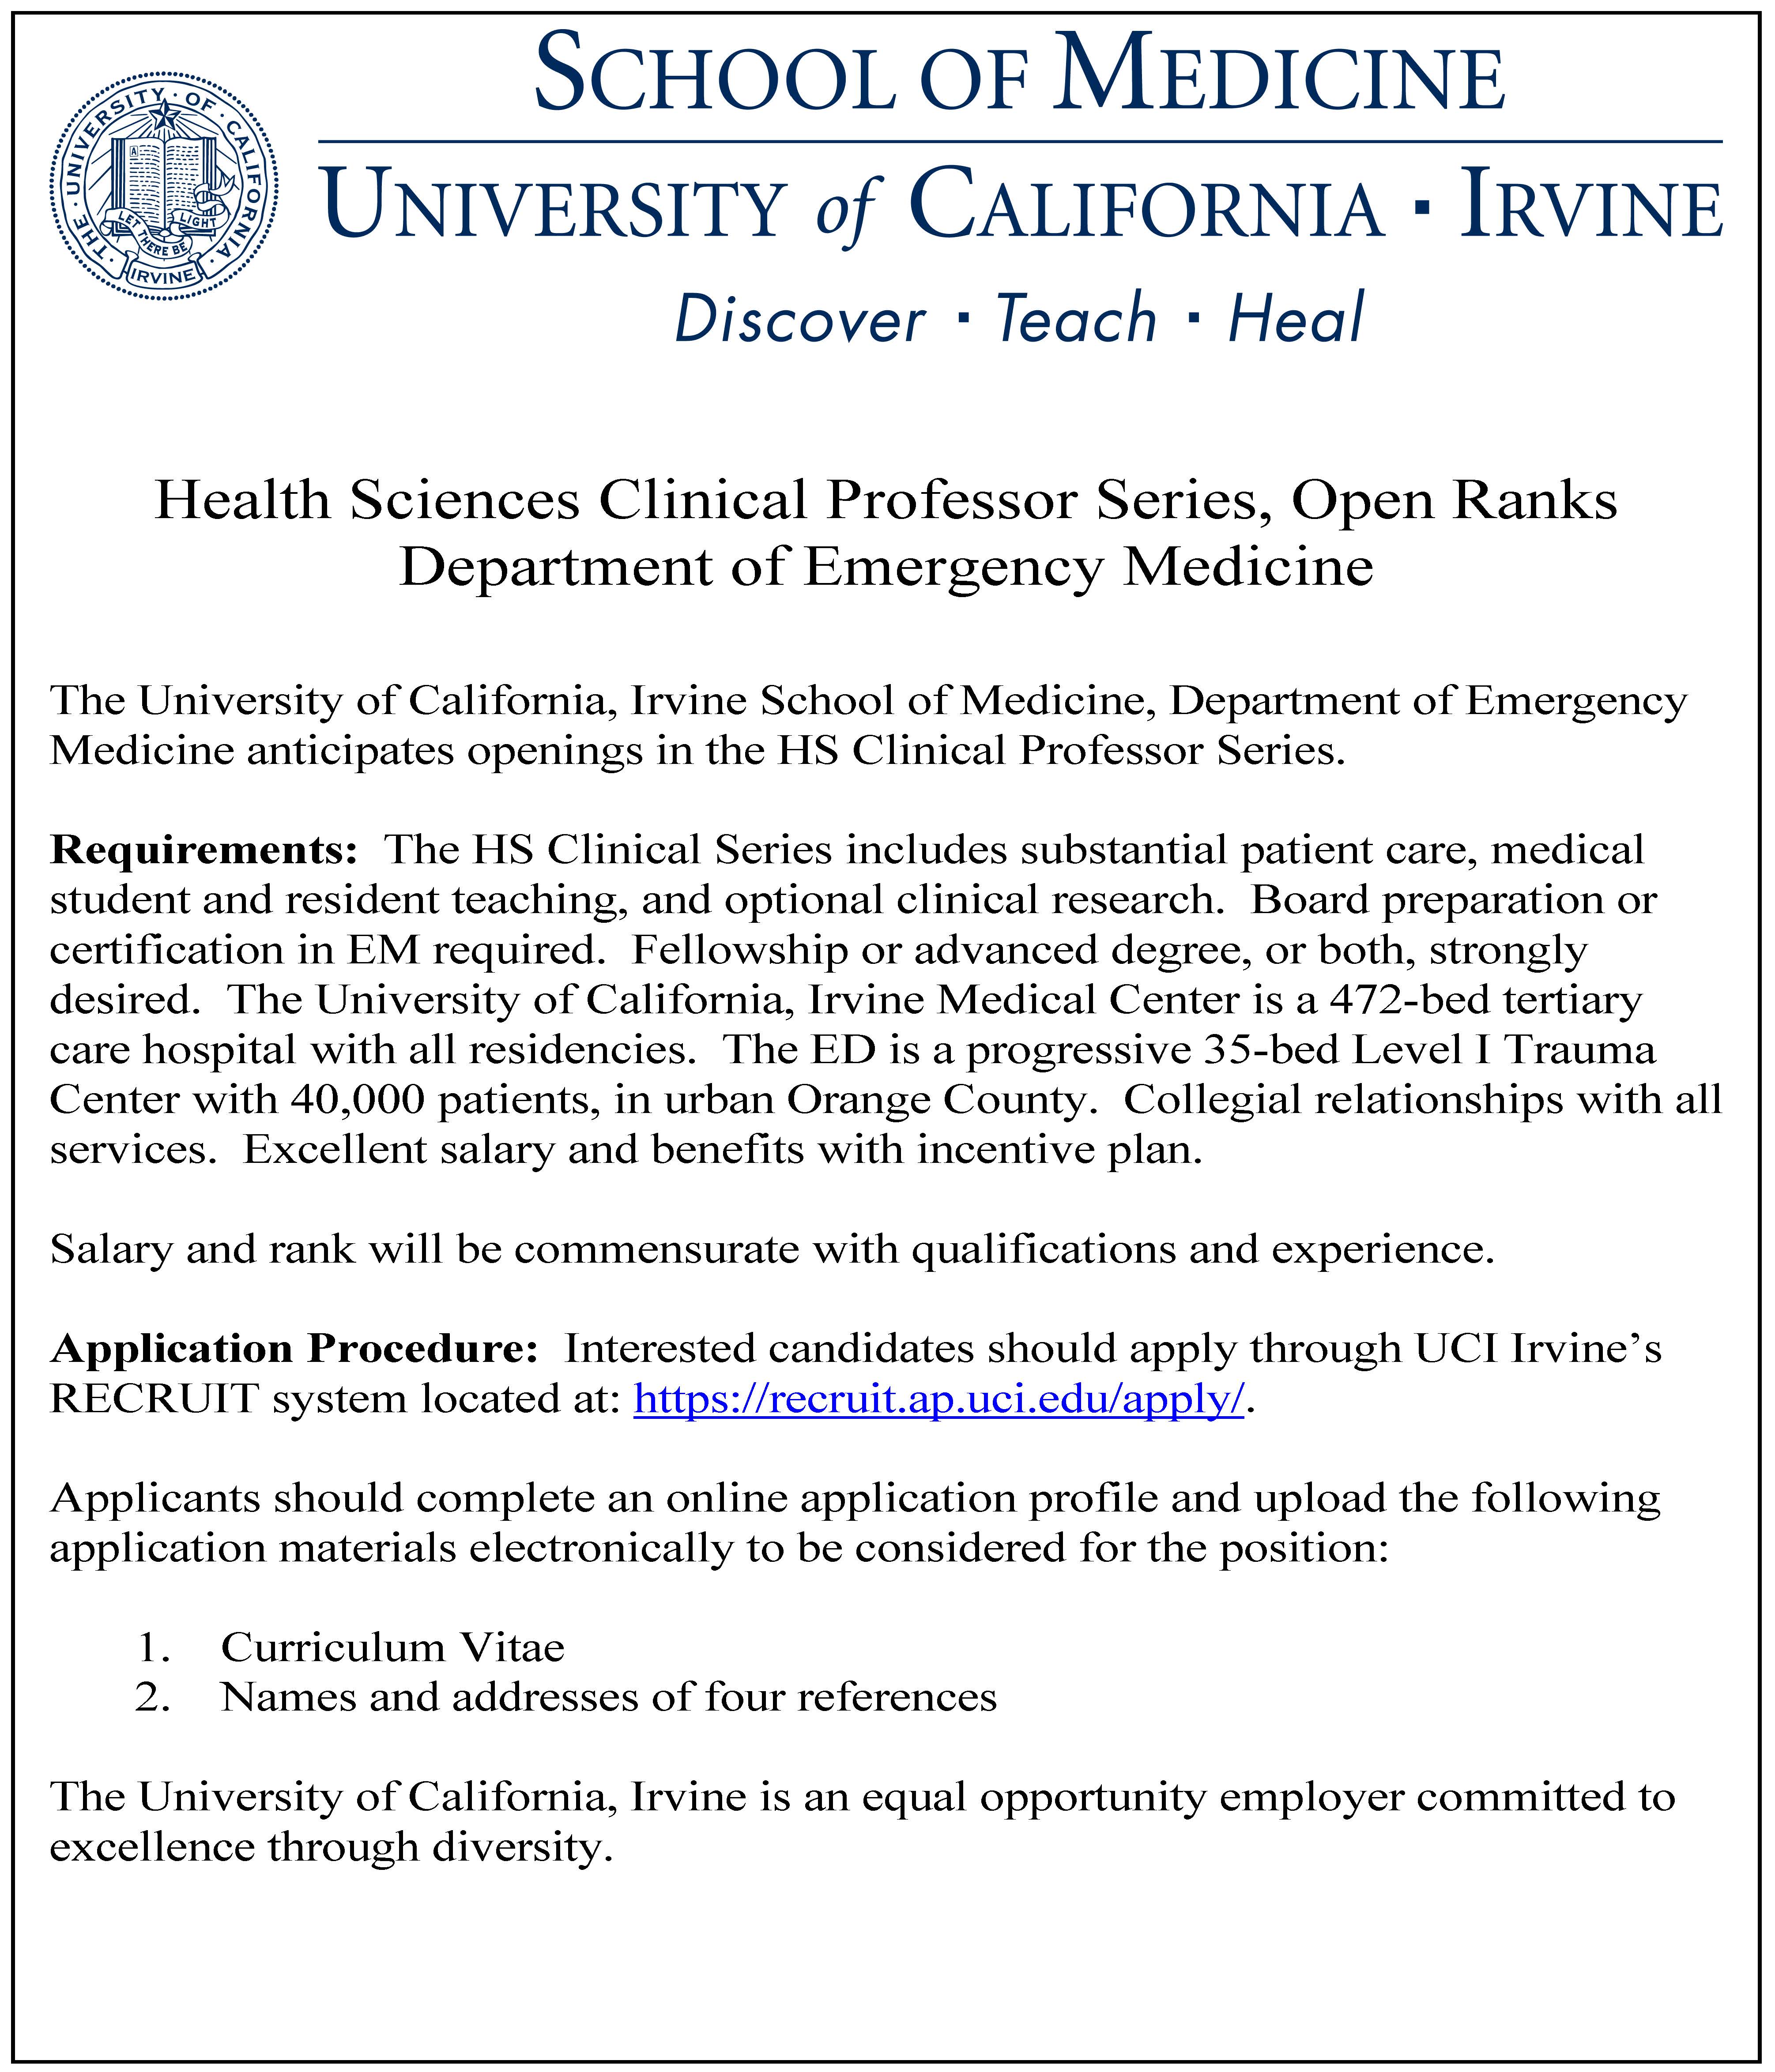 UCI Health Sciences Clinical Professor Series, Open Ranks